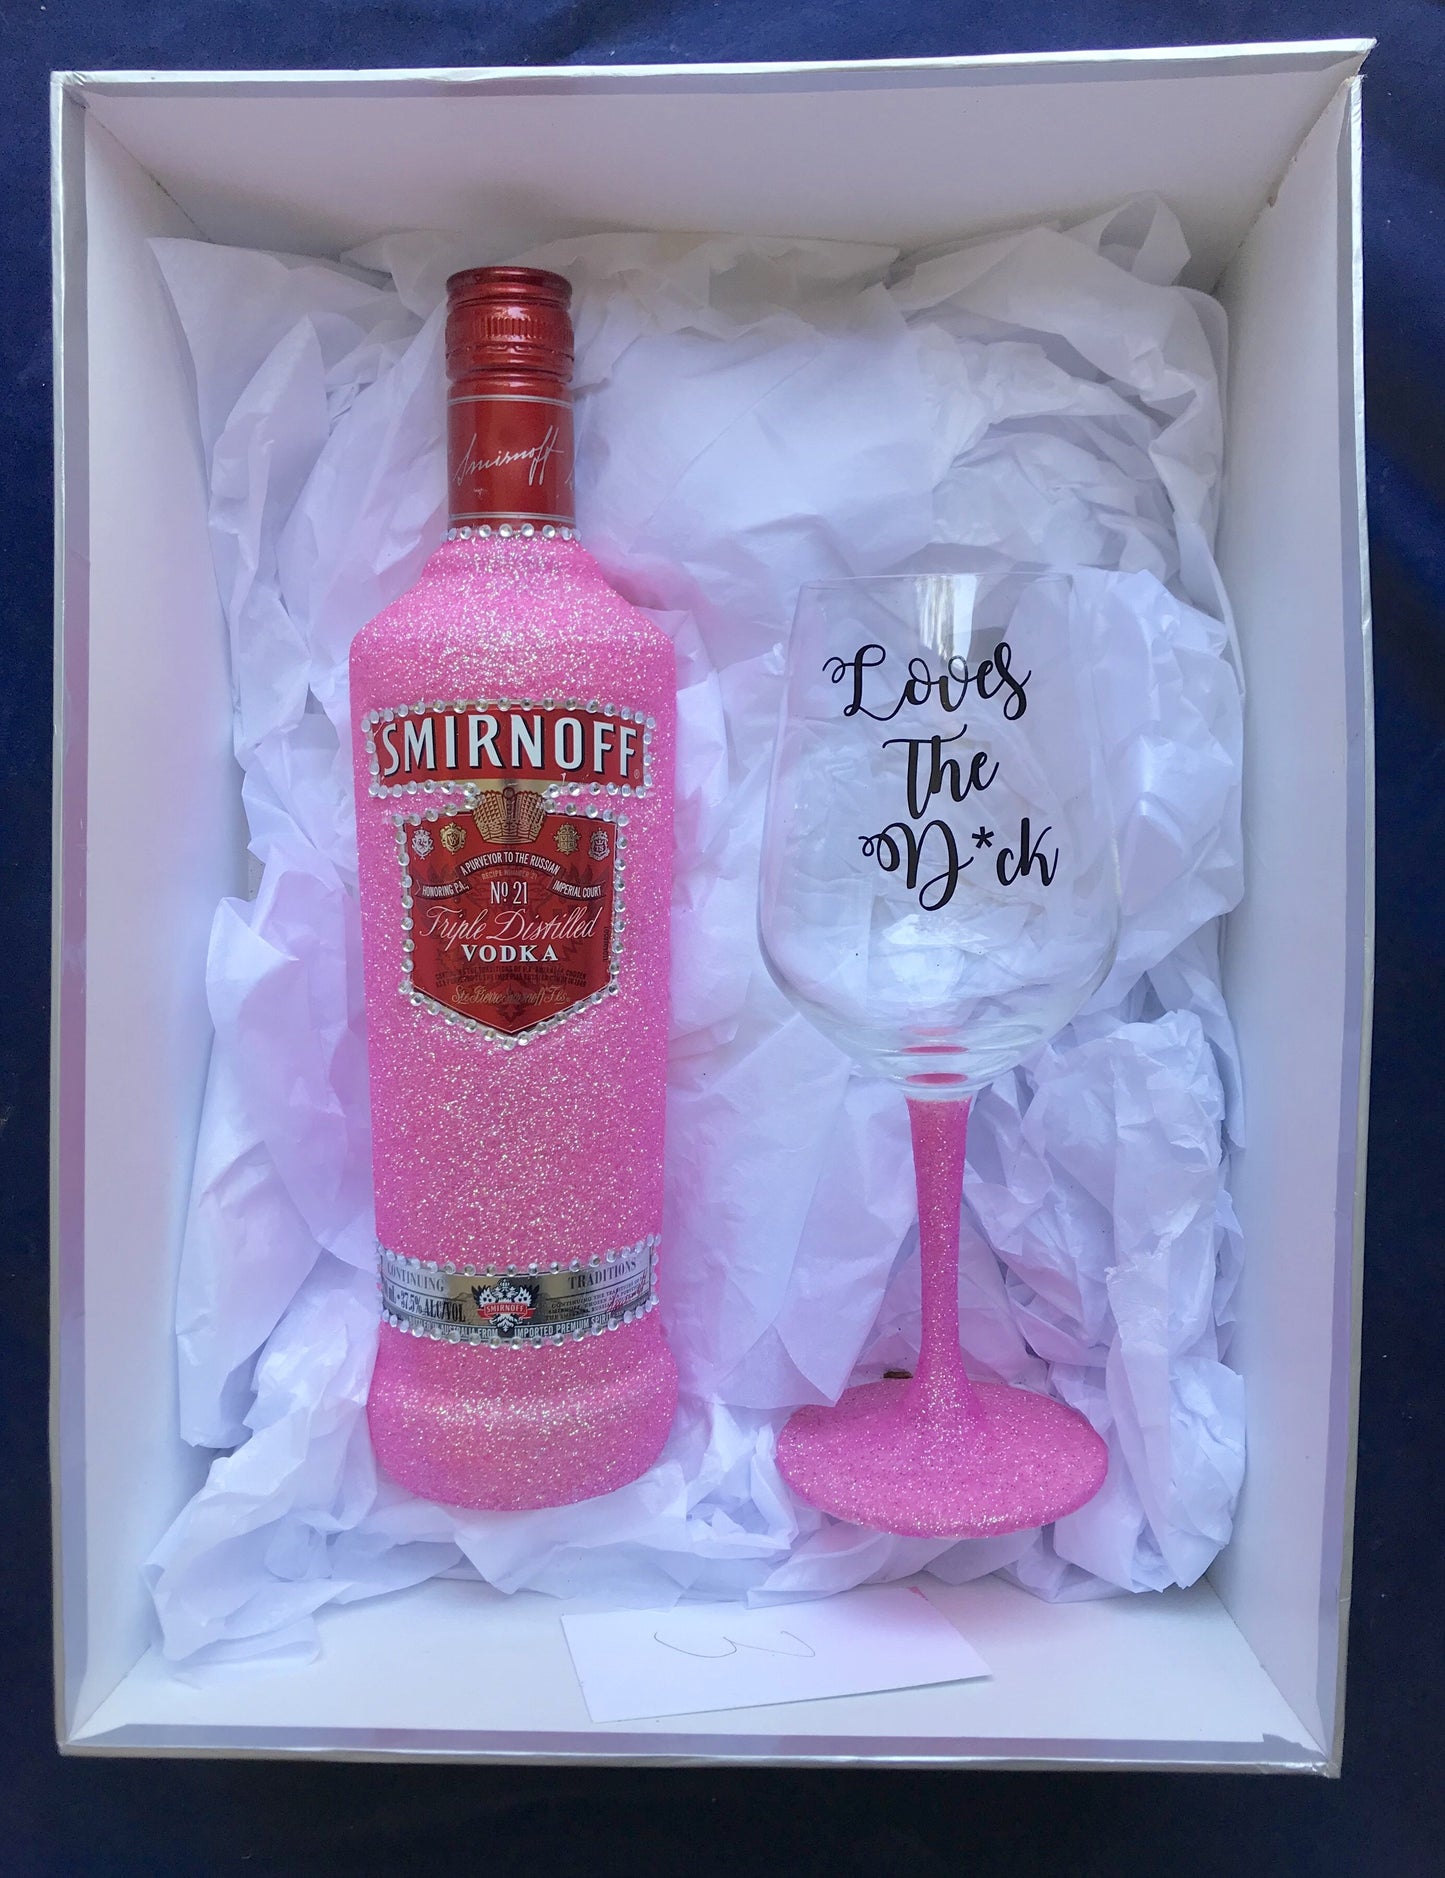 Smirnoff and loves the d*ck glass